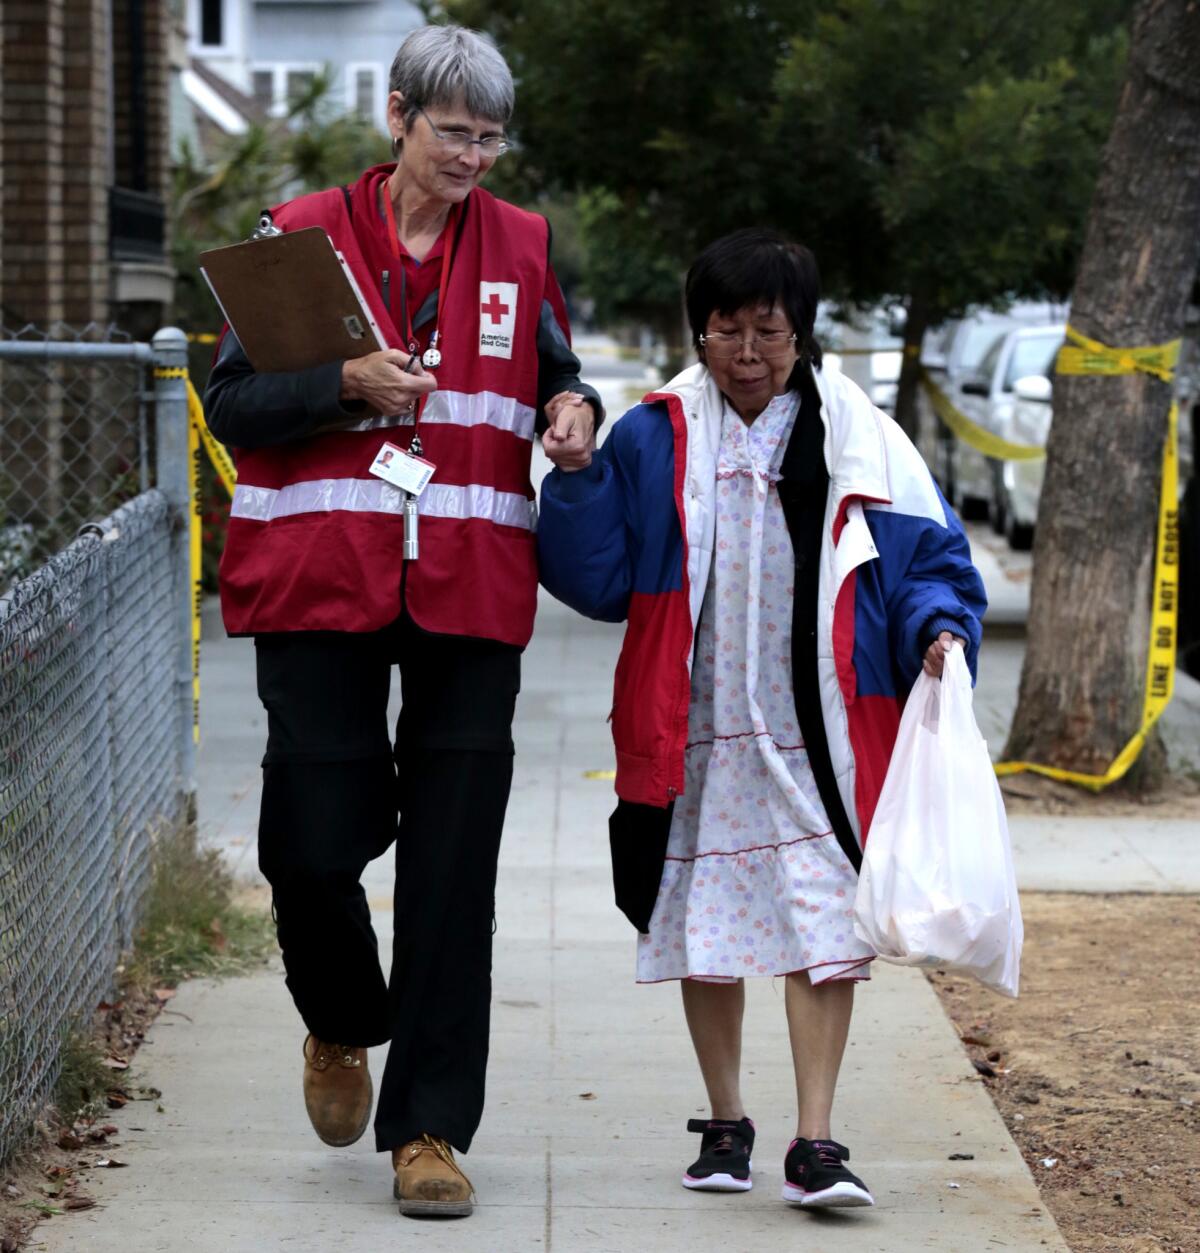 Pat Lynch with the American Red Cross Disaster Team Leader helps one of the displaced residents to gather her belongings from the Fairmont Apartments in Long Beach after a fire destroyed one of the units. Police officers rescued a man and woman from the burning apartment by prying security bars off with a wooden post.